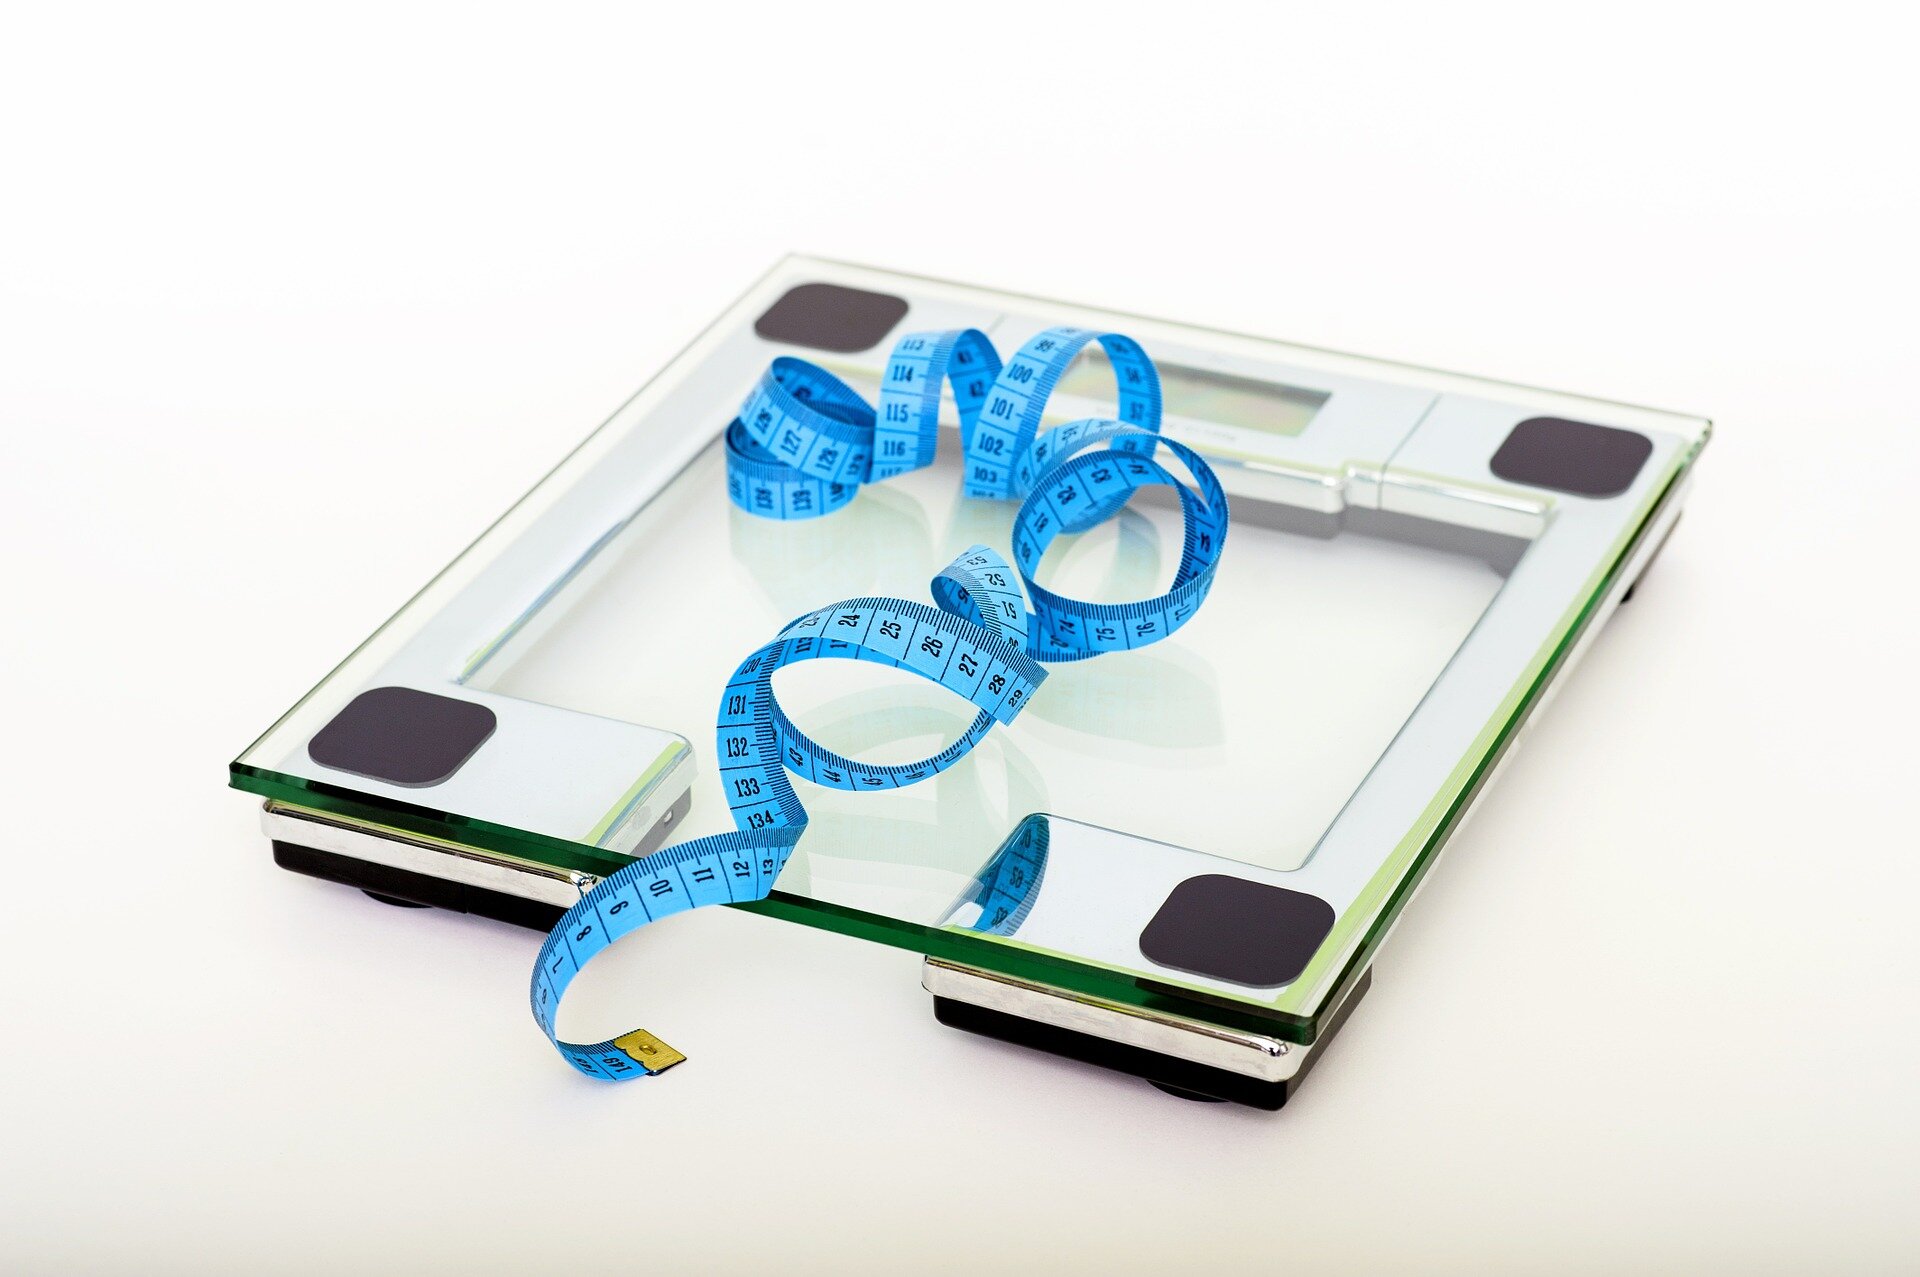 Semaglutide shown to be effective for weight loss in multicenter, one-year real-world study